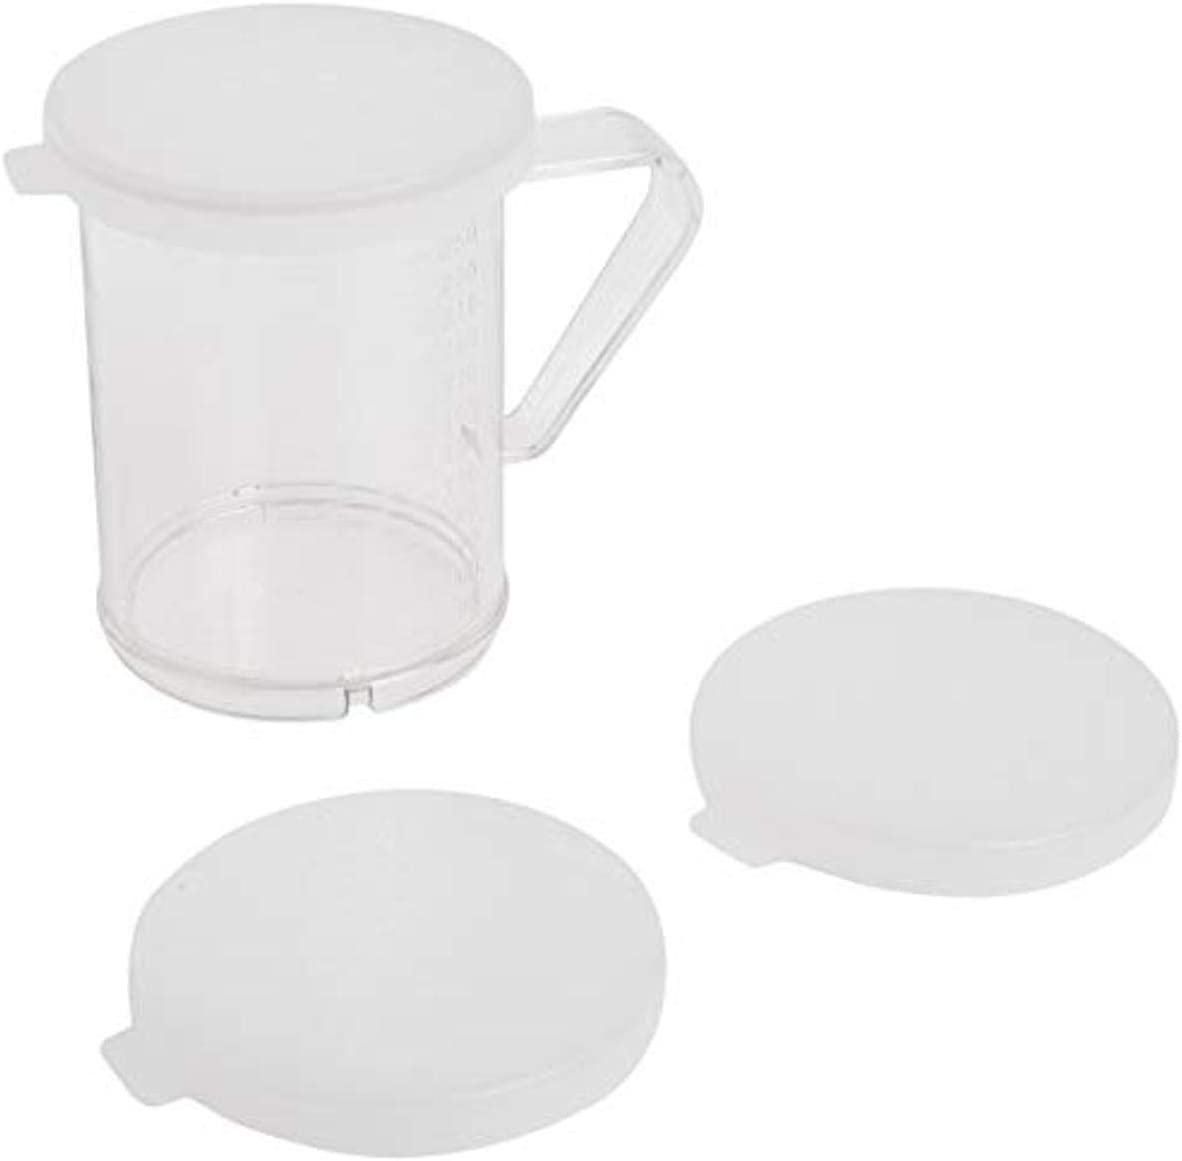 Winware 10-Ounce Polycarbonate Dredge with 3 Snap-on Lids (Set of 2) Import To Shop ×Product customization General Description